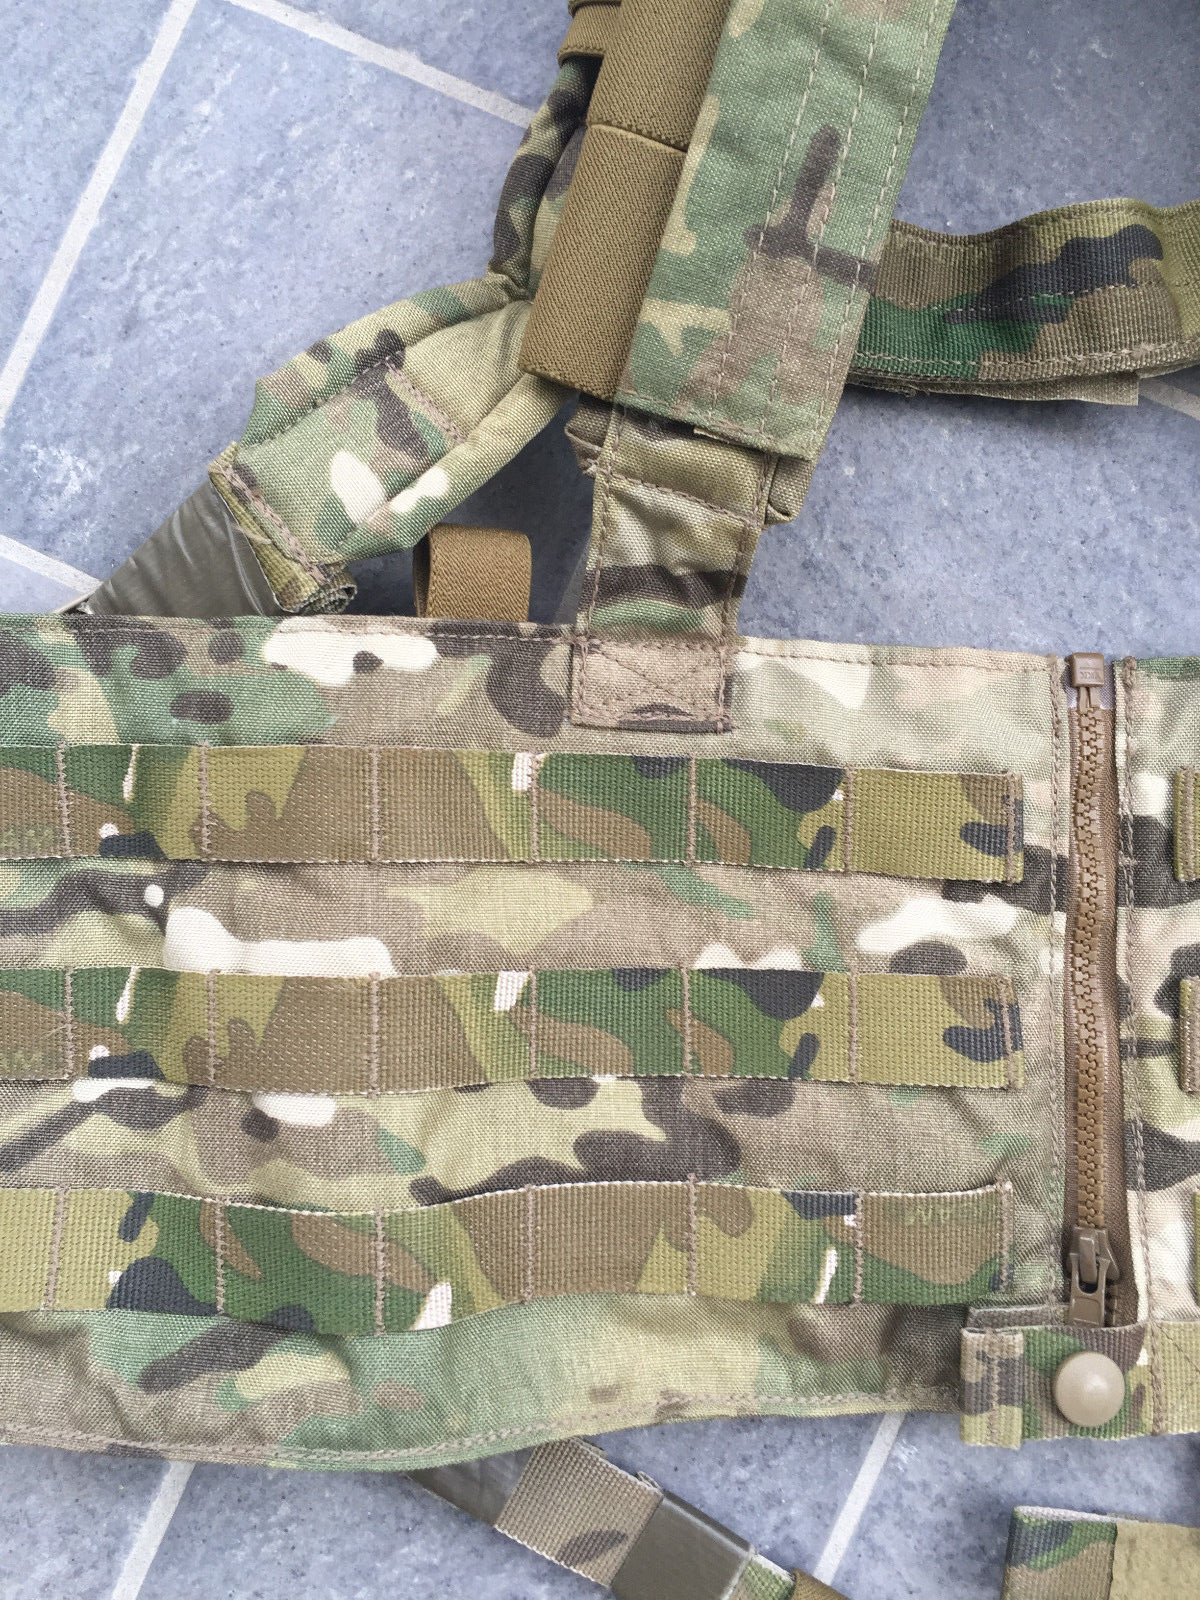 Webbingbabel: Eagle Industries Multi Purpose Chest Rig Full Molle Front